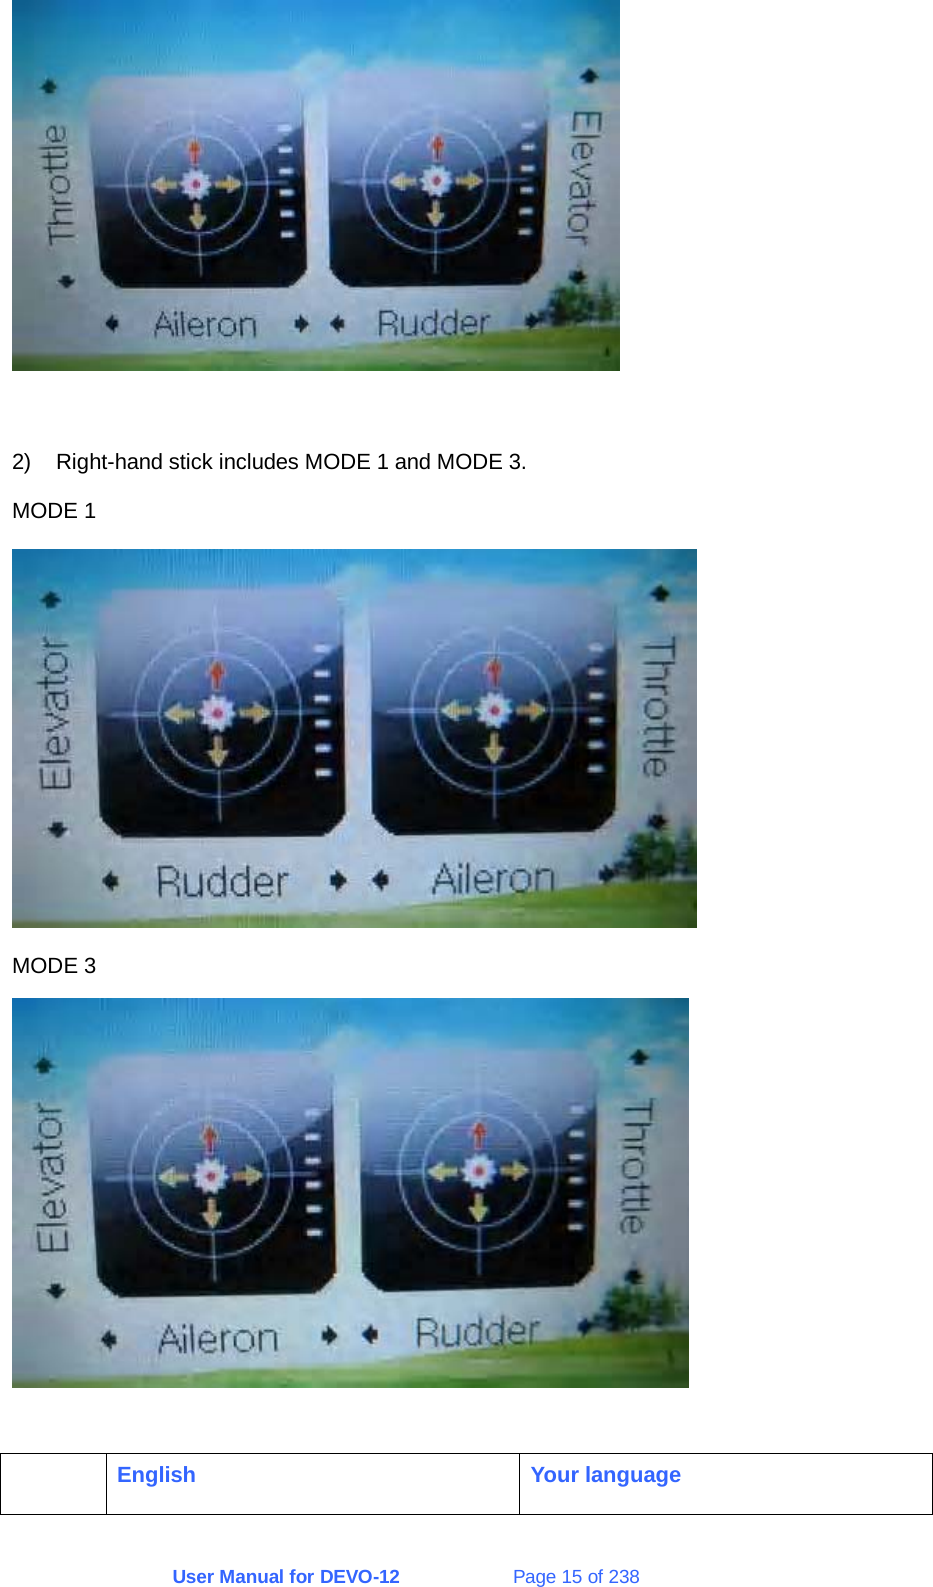 User Manual for DEVO-12             Page 15 of 238   2)  Right-hand stick includes MODE 1 and MODE 3. MODE 1  MODE 3    English  Your language 